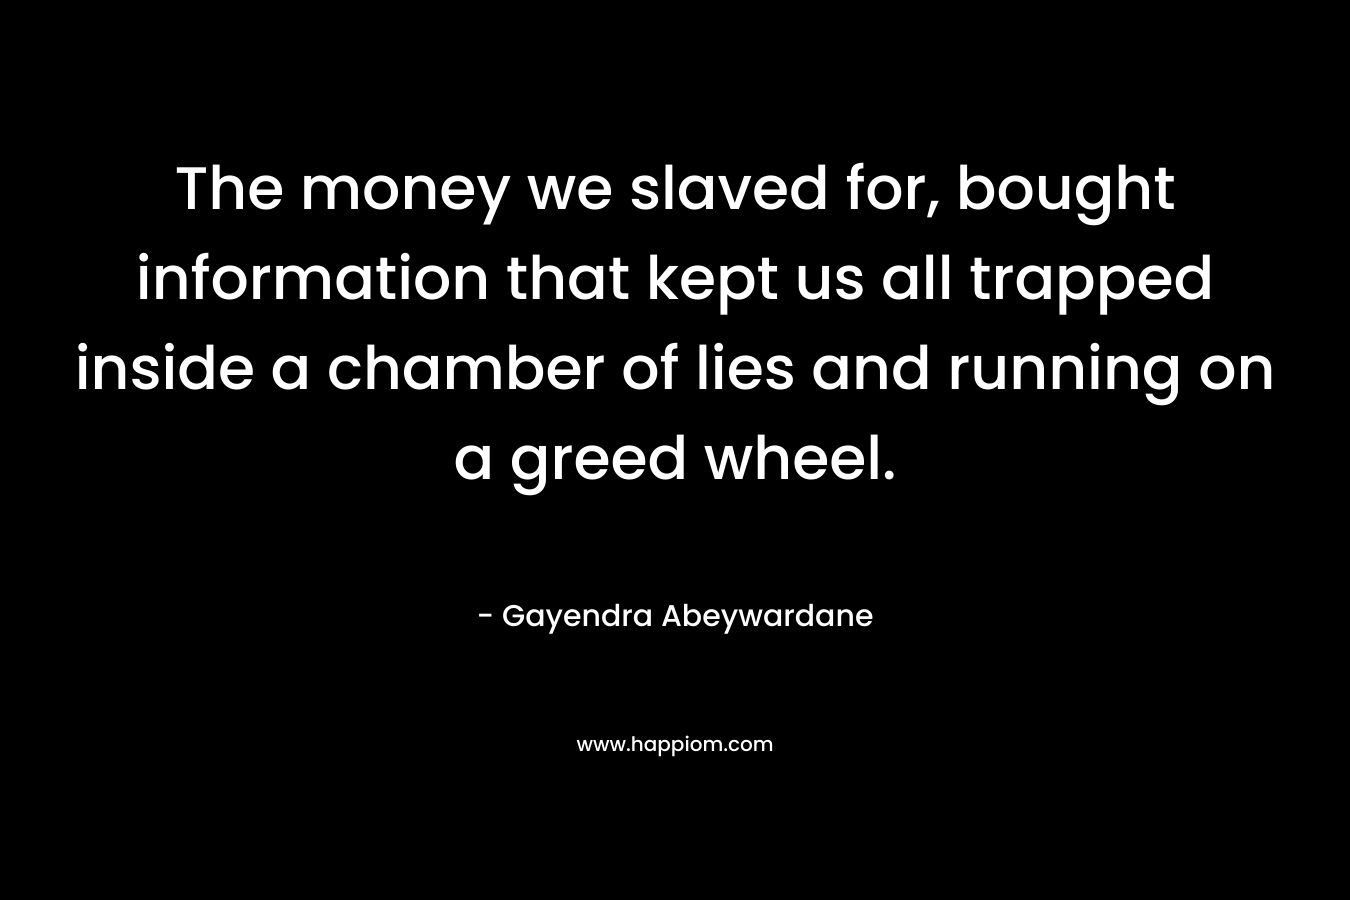 The money we slaved for, bought information that kept us all trapped inside a chamber of lies and running on a greed wheel. – Gayendra Abeywardane